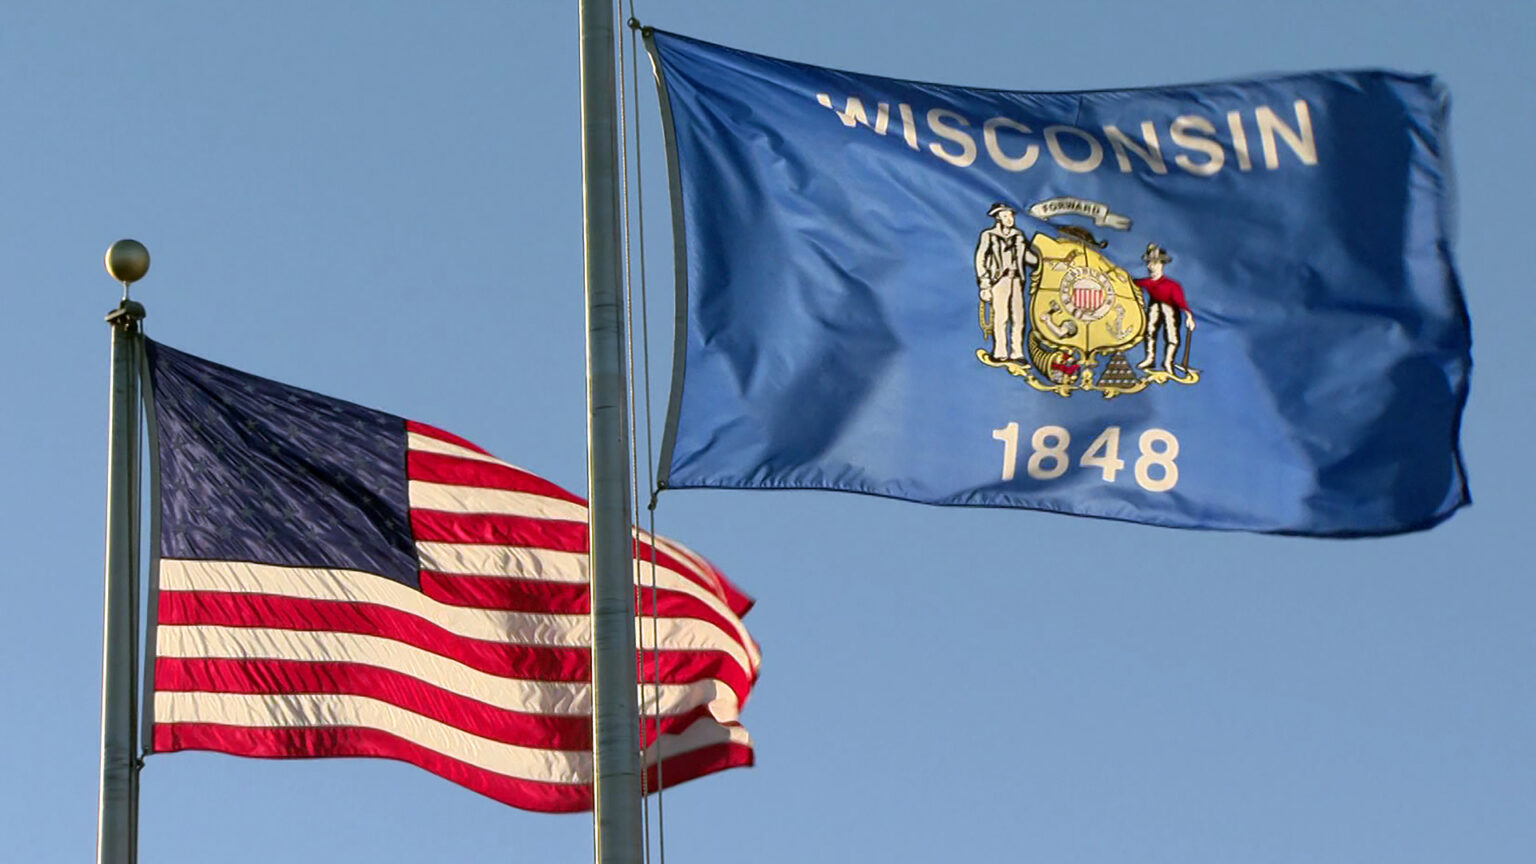 The U.S. and Wisconsin flags wave while attached to flagpoles, with a clear sky in the background.